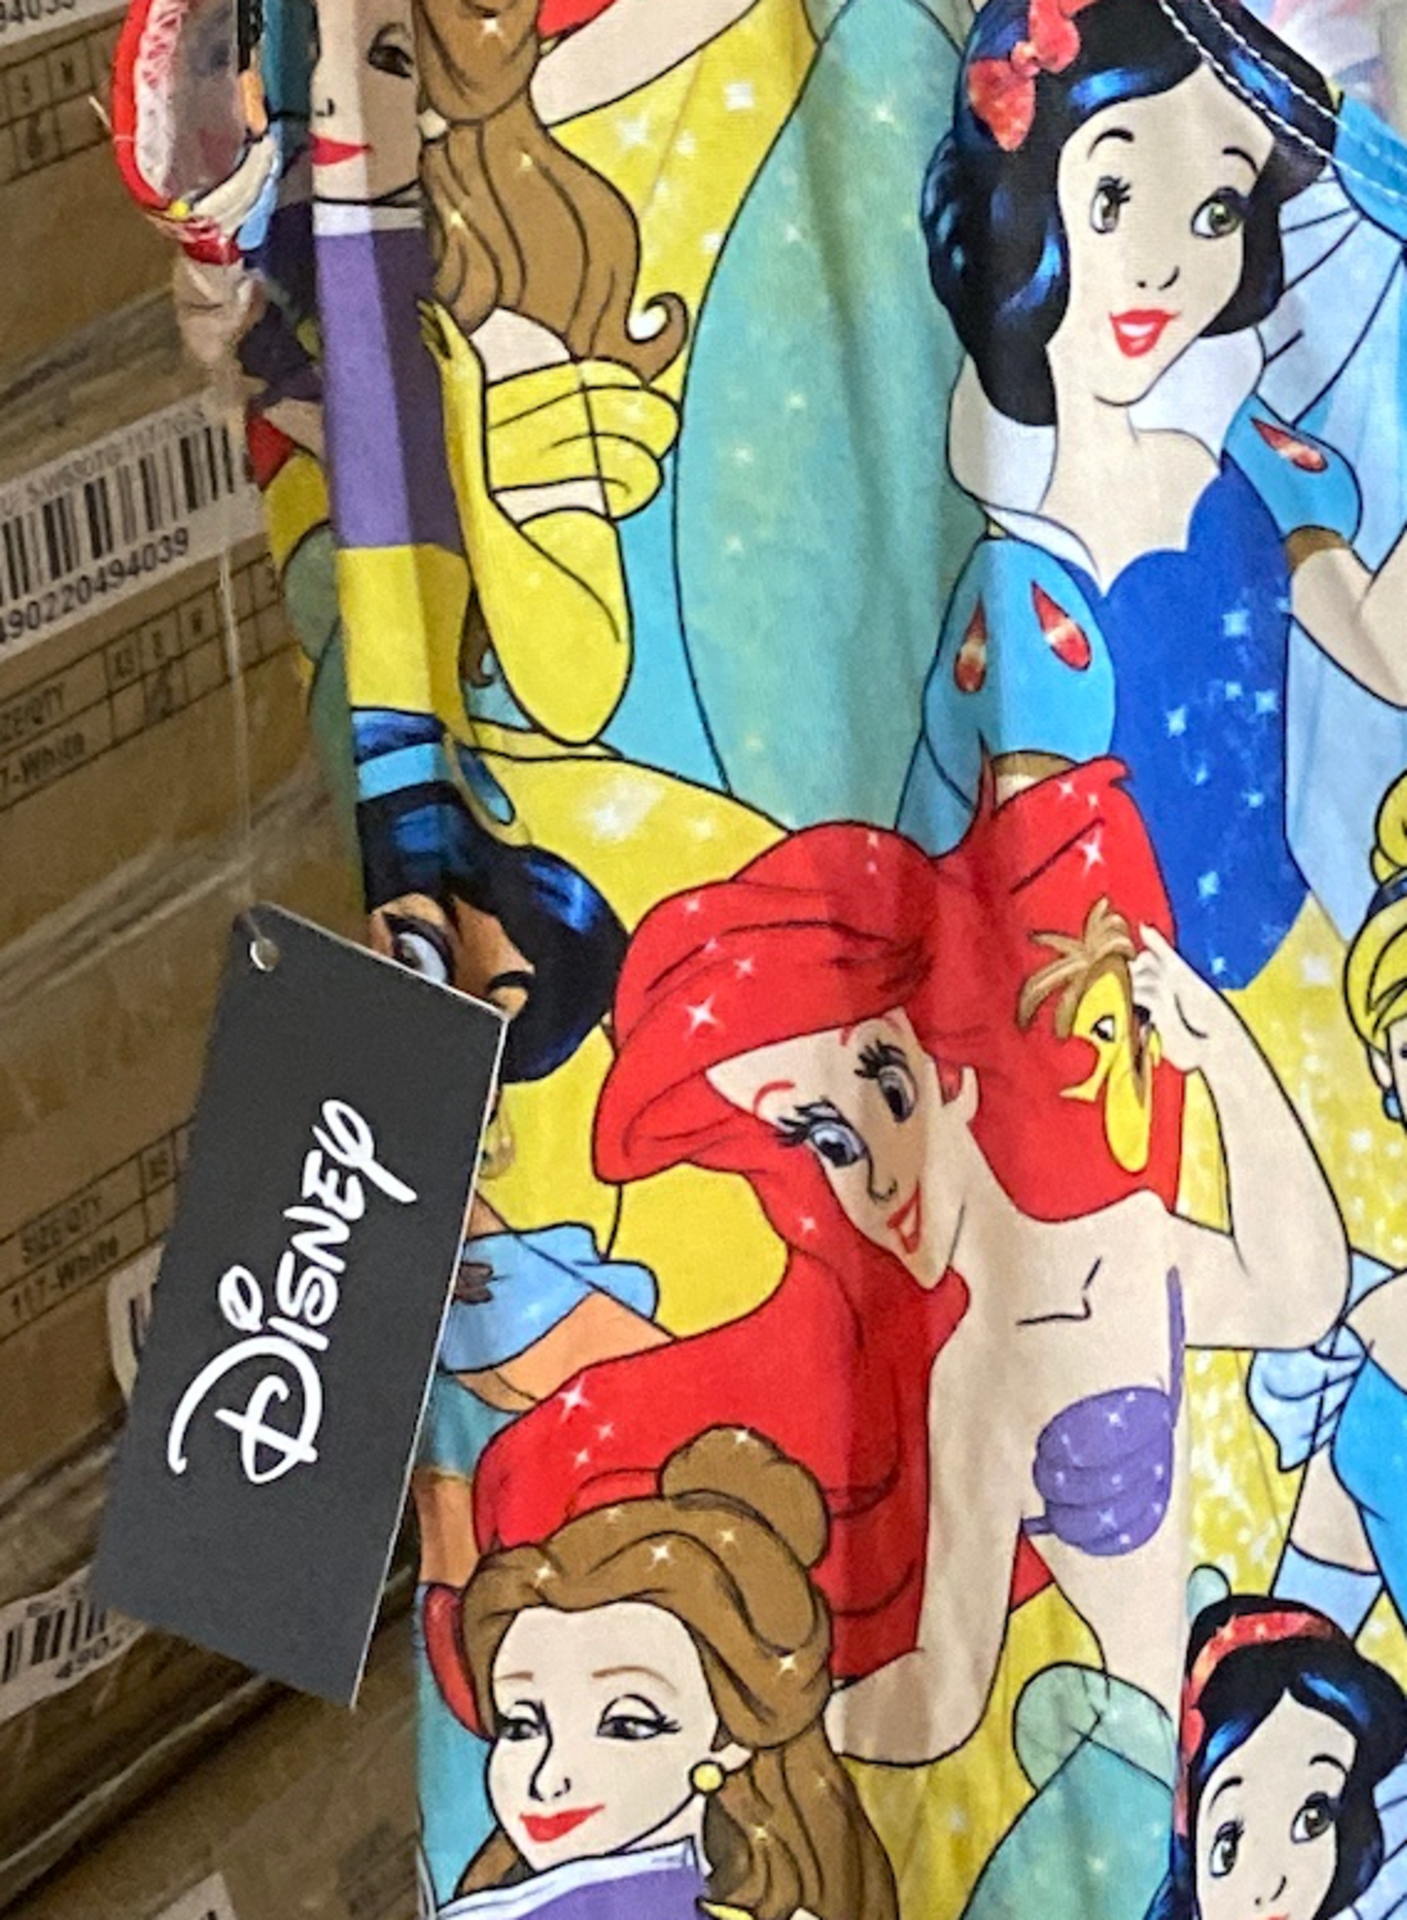 735 DISNEY'S PRINCESS GIRLS BODYSUIT, NEW WITH TAGS ON HANGERS LOCATED IN MIAMI, FL $11,000 VALUE - Image 3 of 4